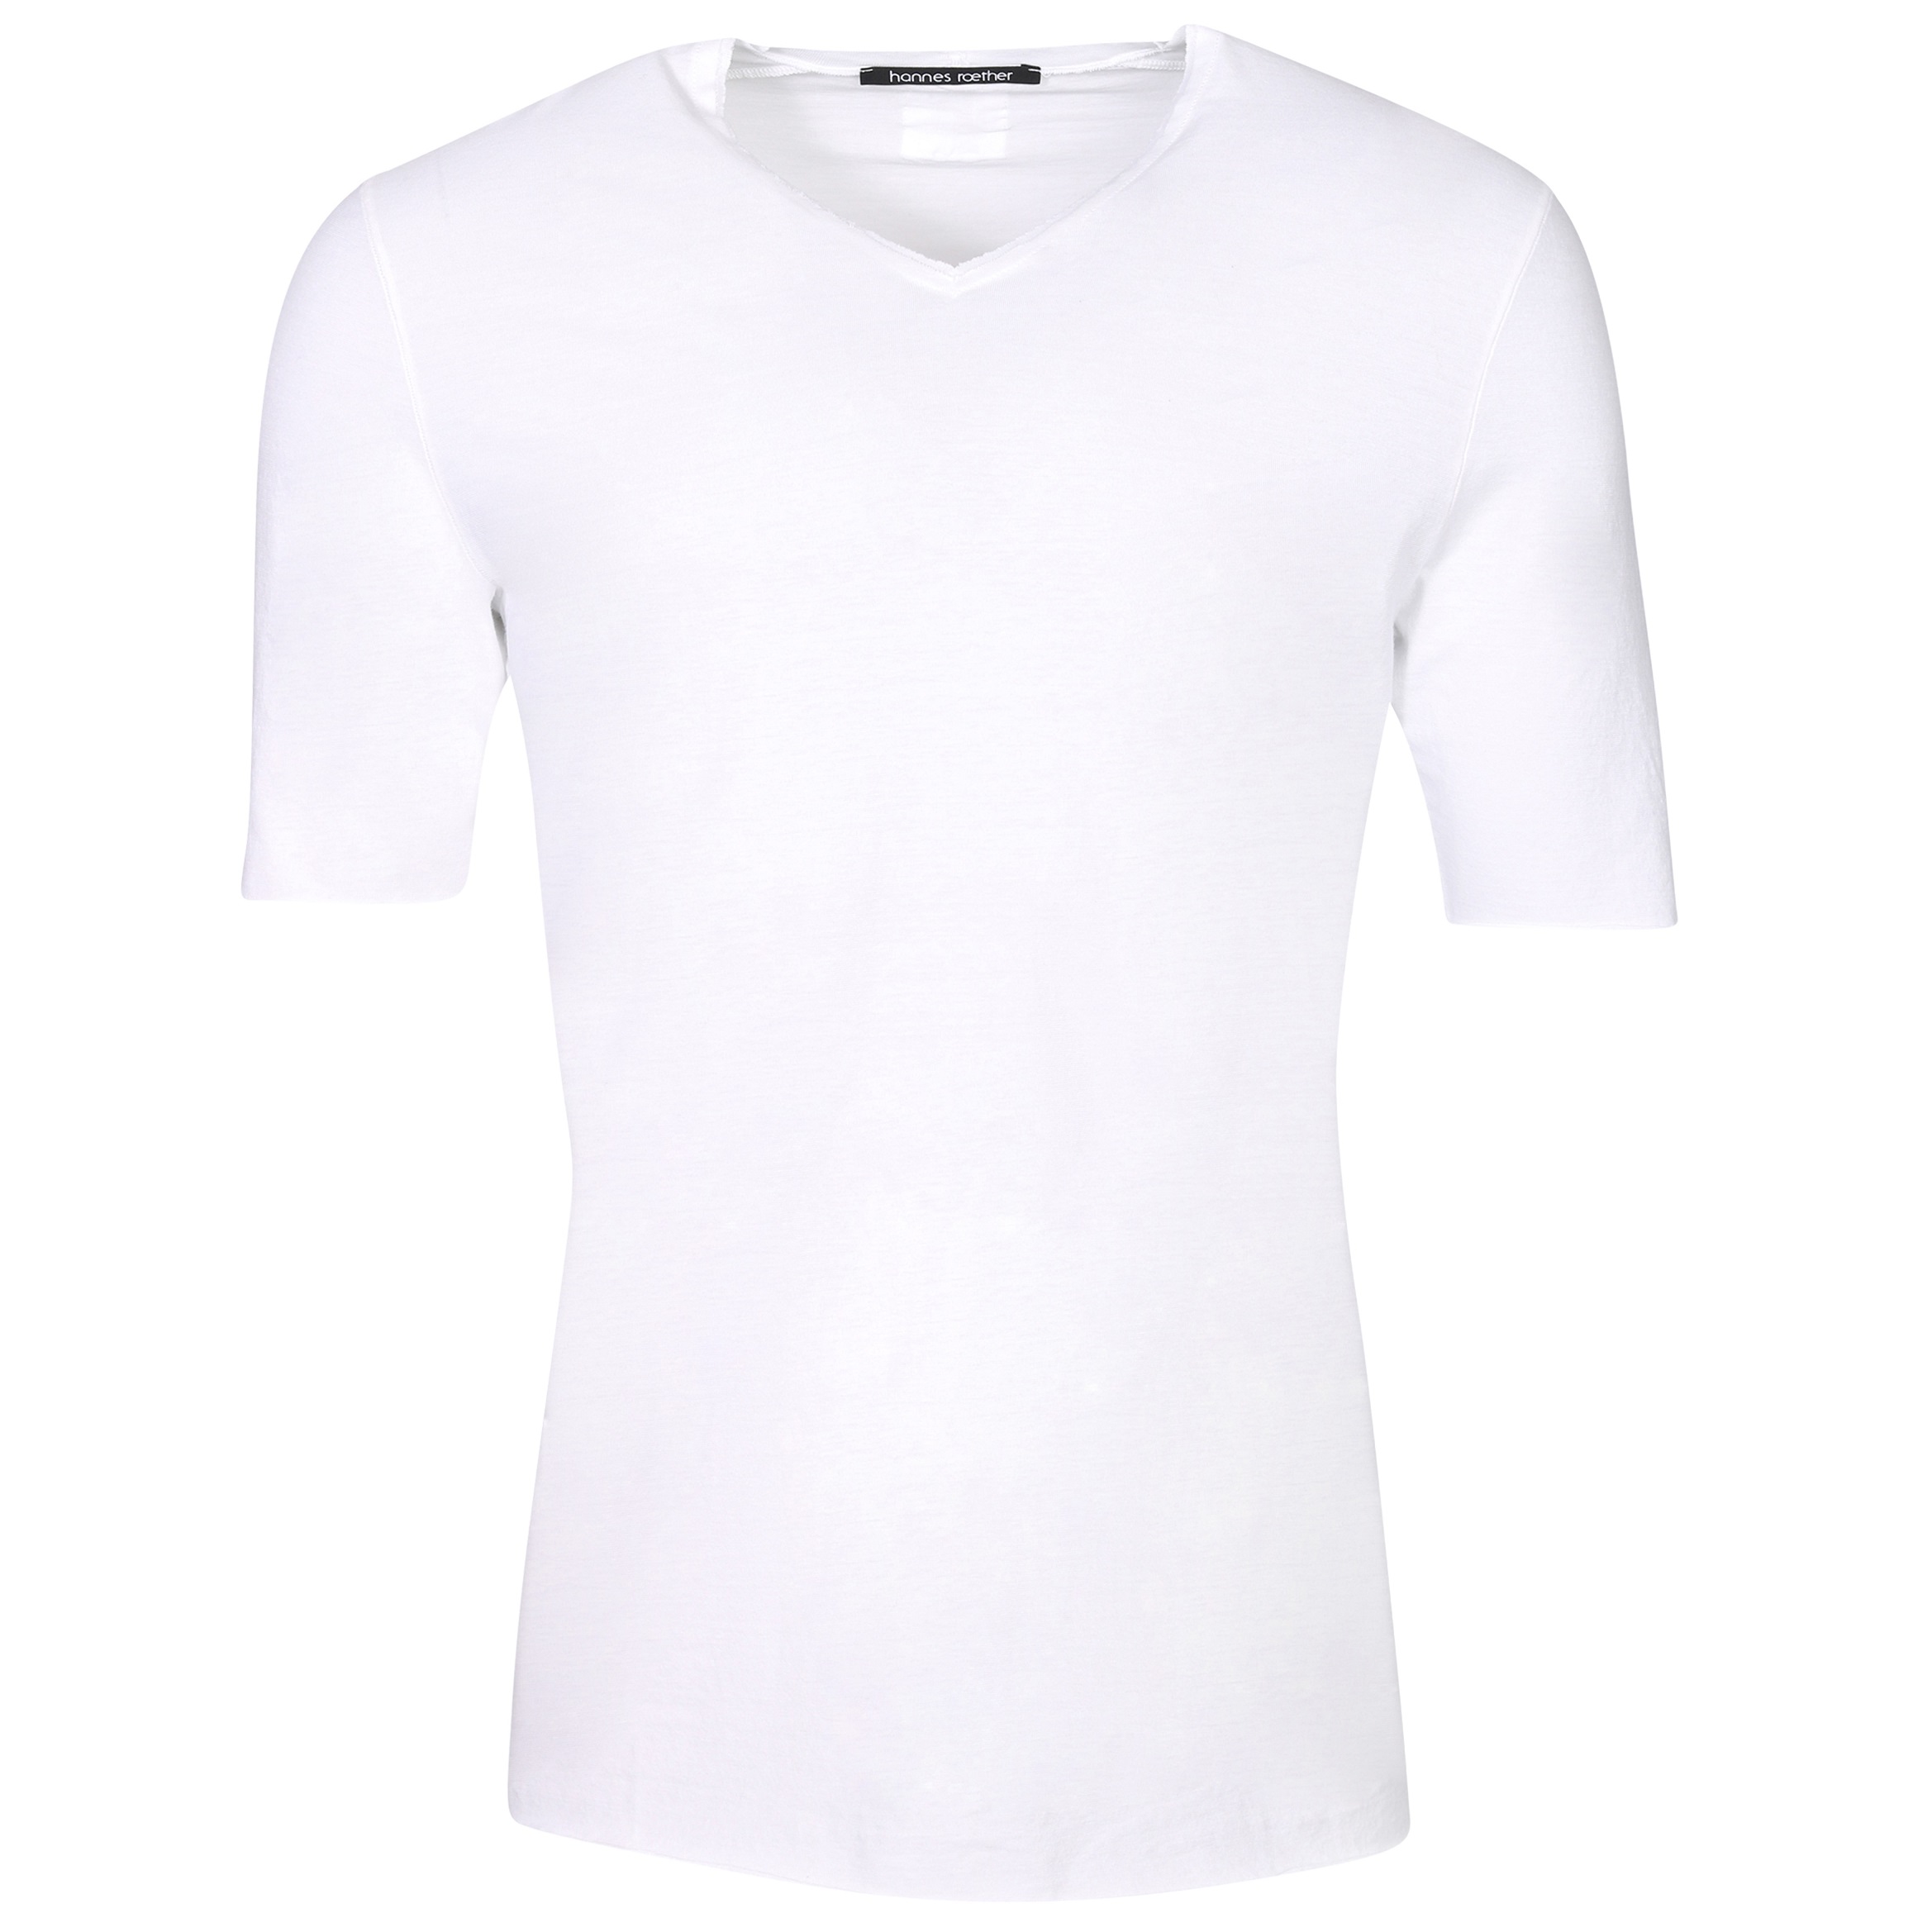 Hannes Roether V-Neck T-Shirt in White XXL